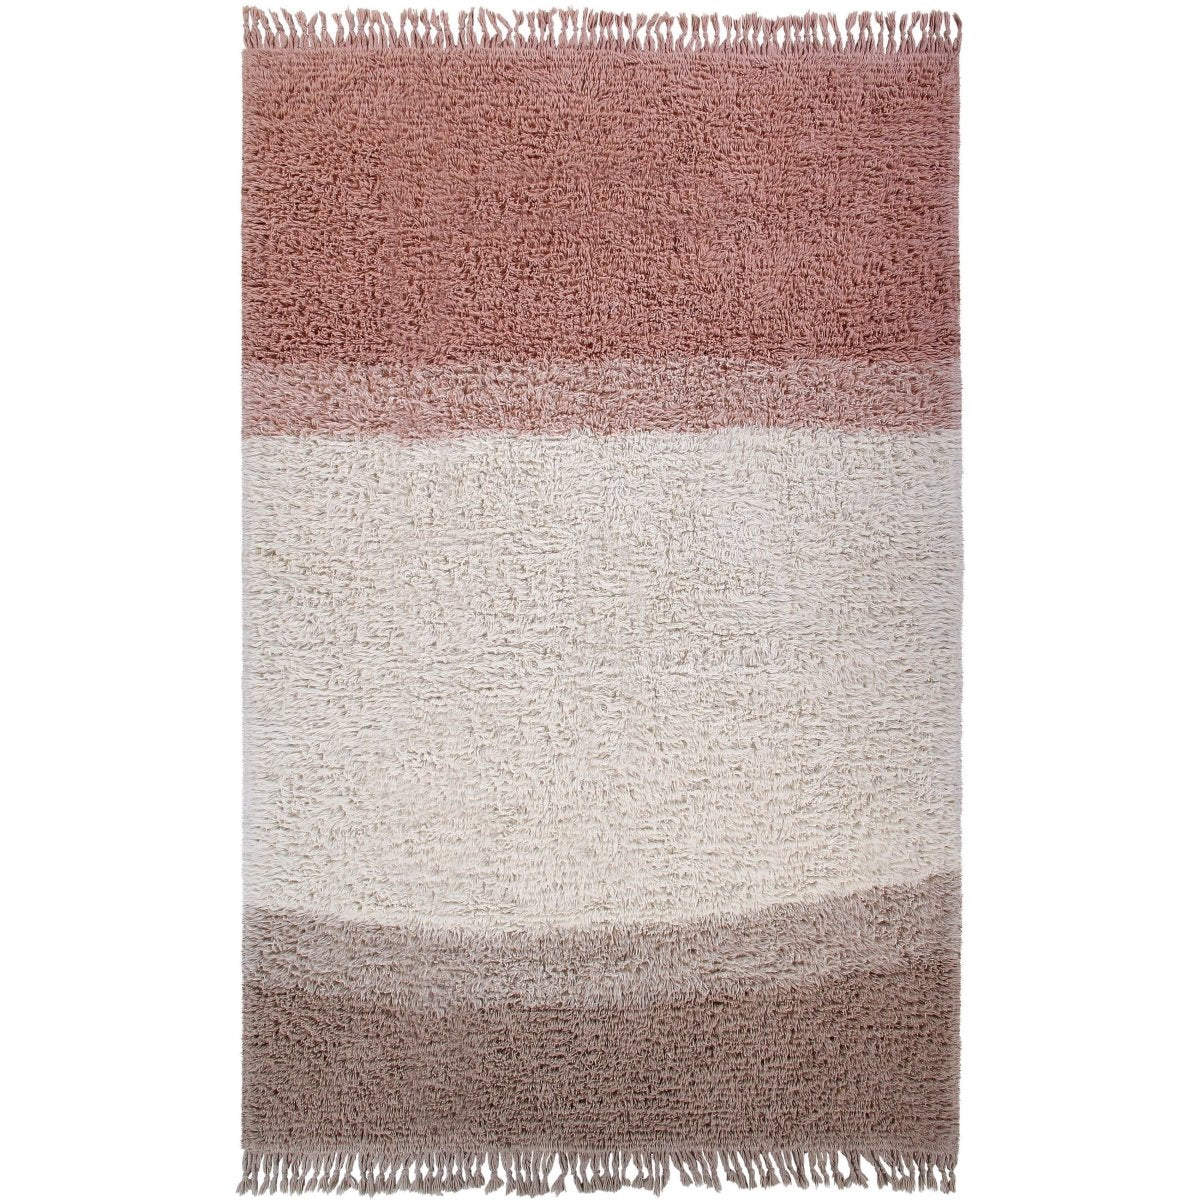 LORENA CANALS-Tapis Woolable Sounds Of Summer 200 X 300 Cm-Les Petits